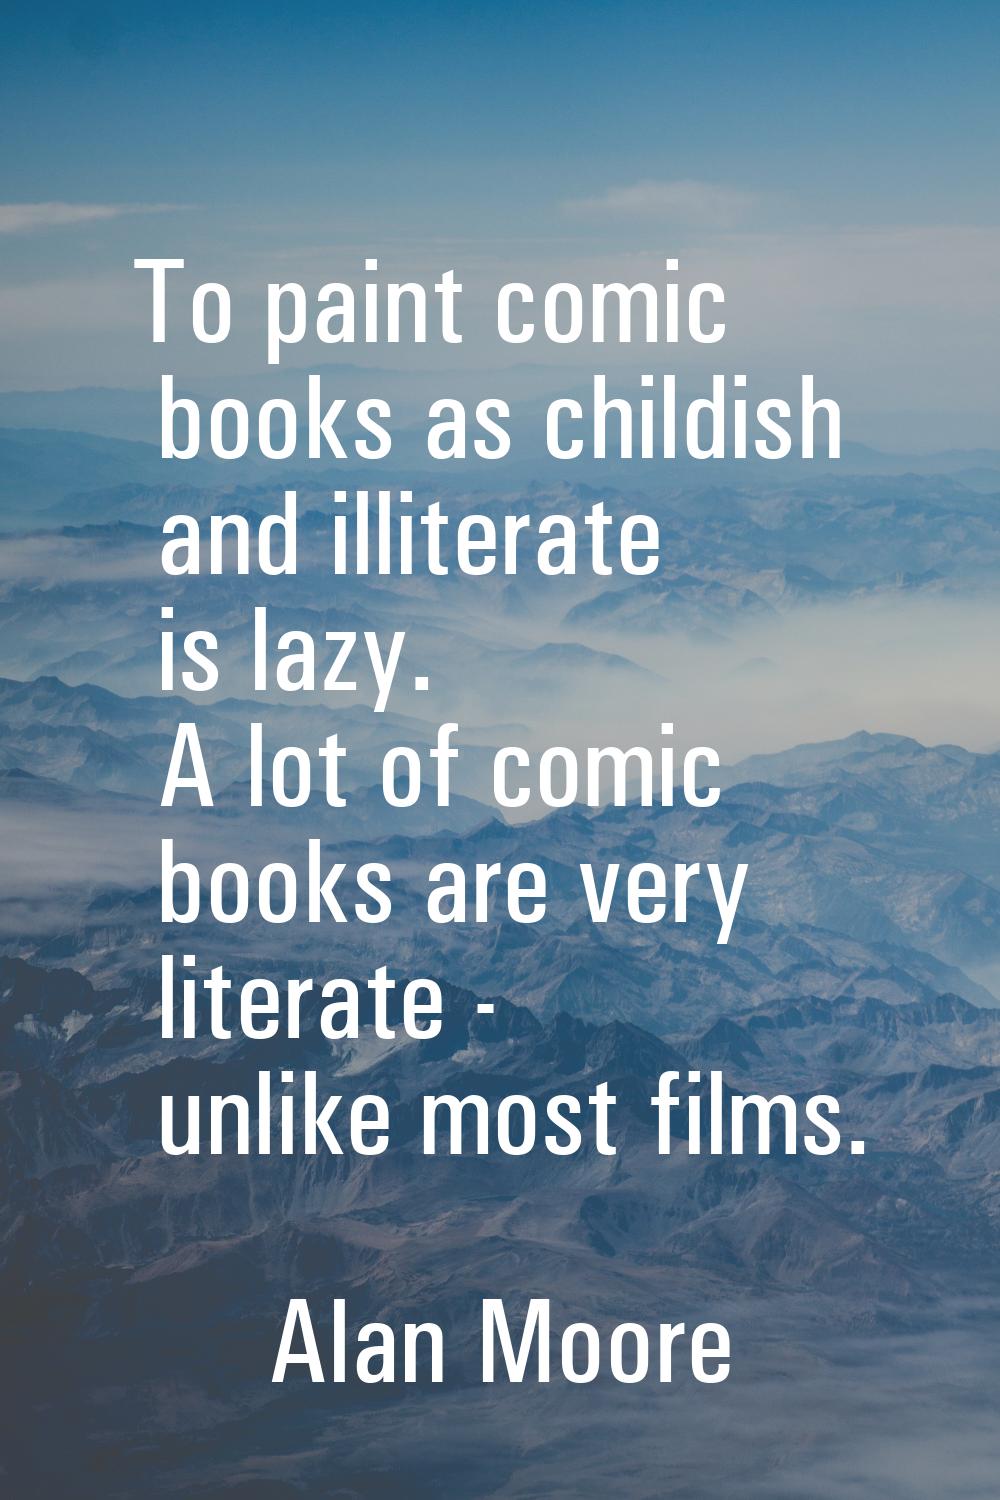 To paint comic books as childish and illiterate is lazy. A lot of comic books are very literate - u